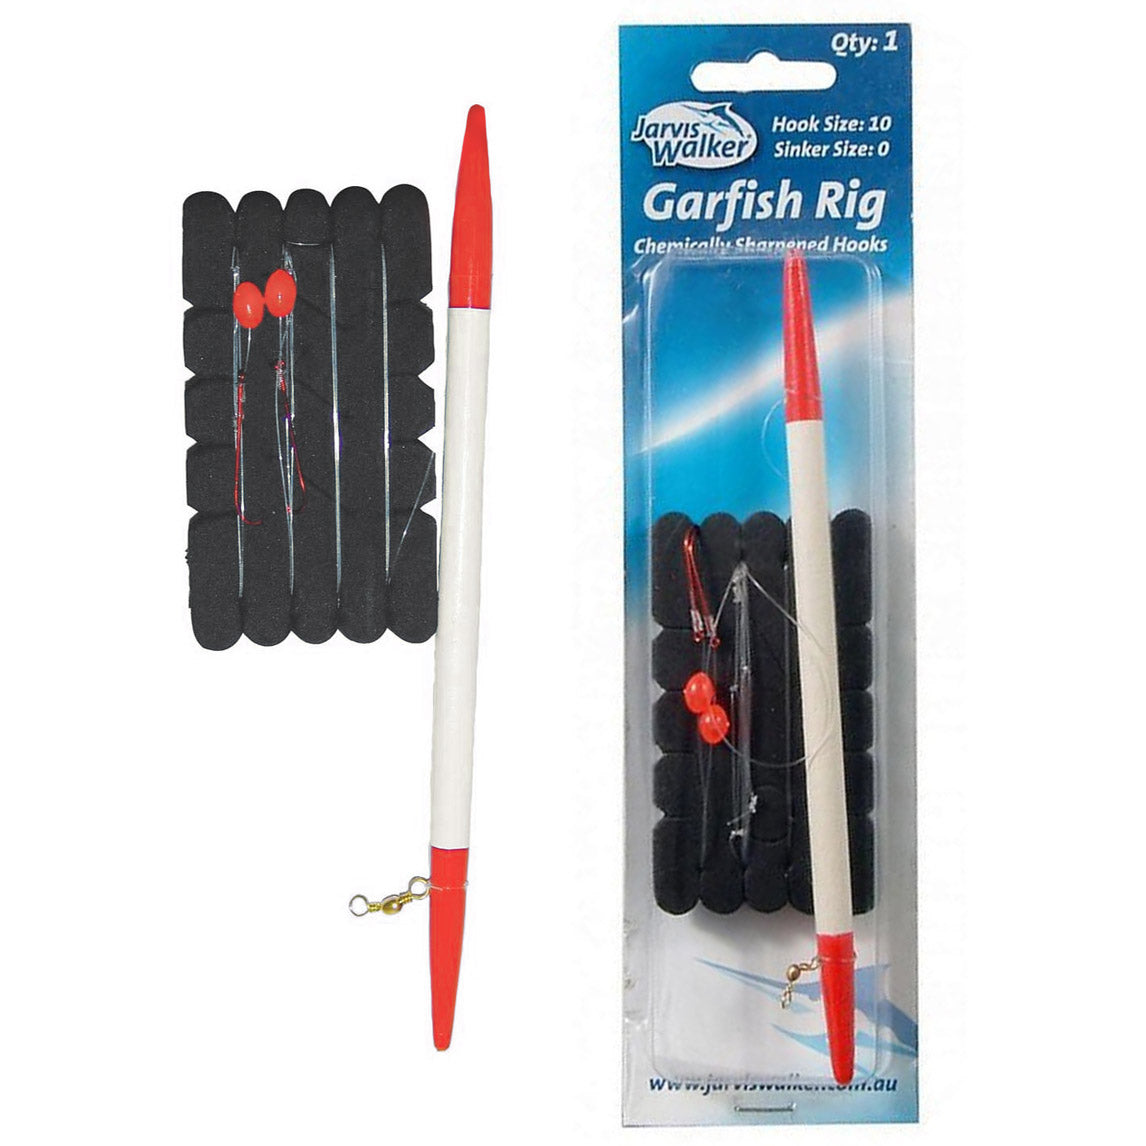 Garfish Rig With Chemically Sharpened #10 Hook — Spot On Fishing Tackle